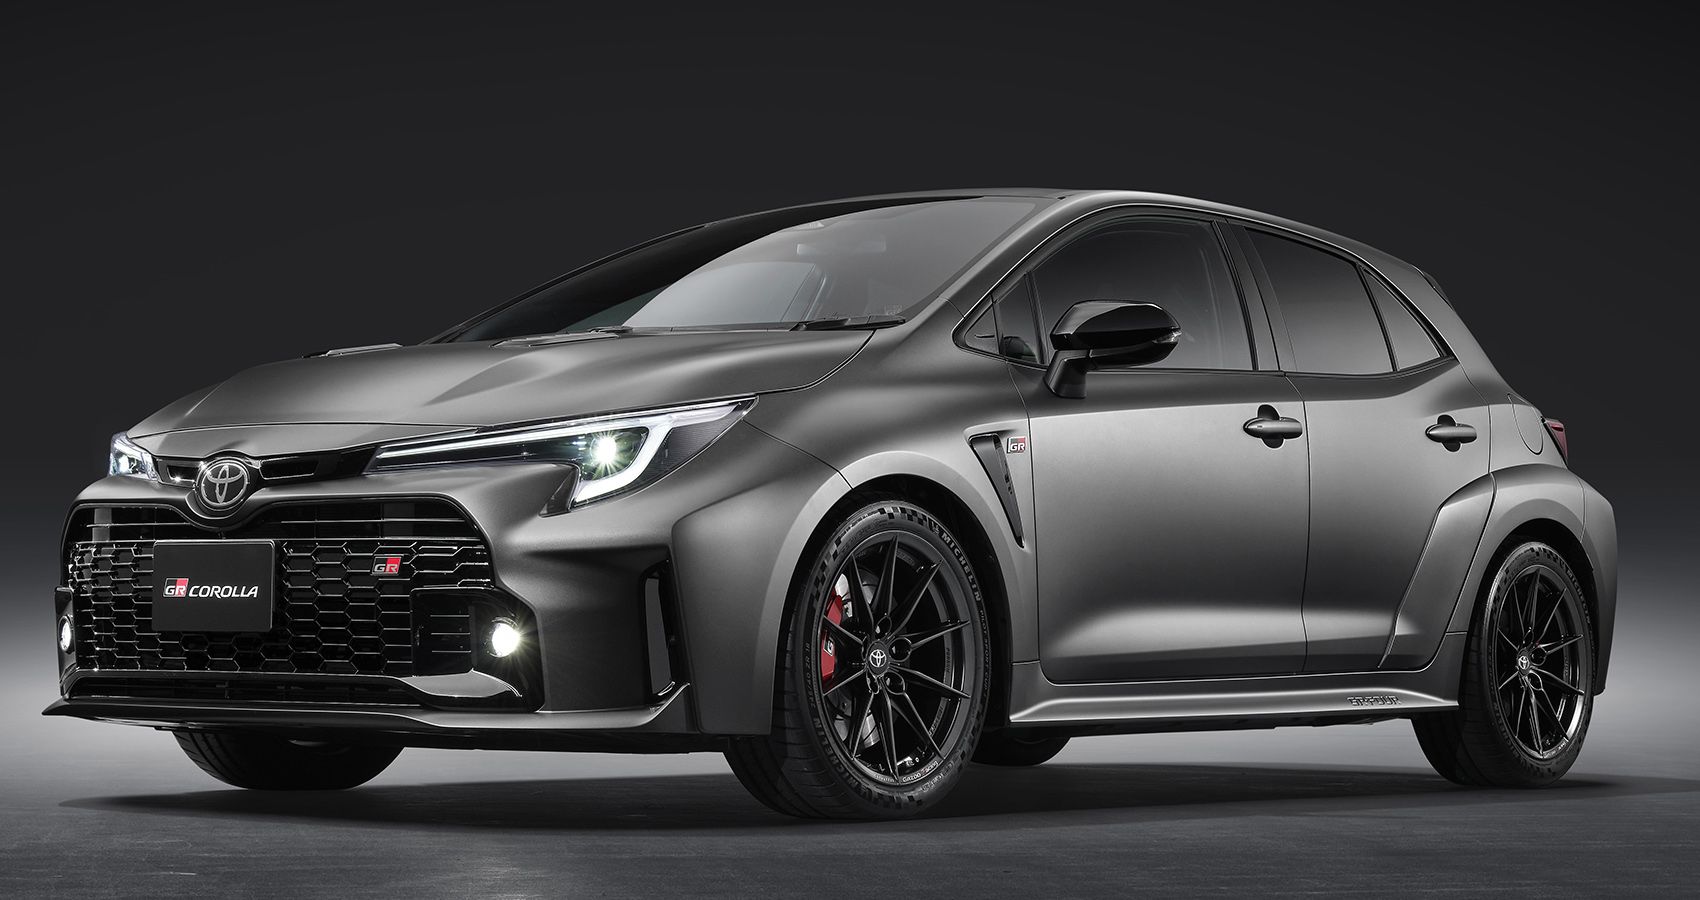 The Toyota GR Corolla is a mean-looking high-performance hatchback